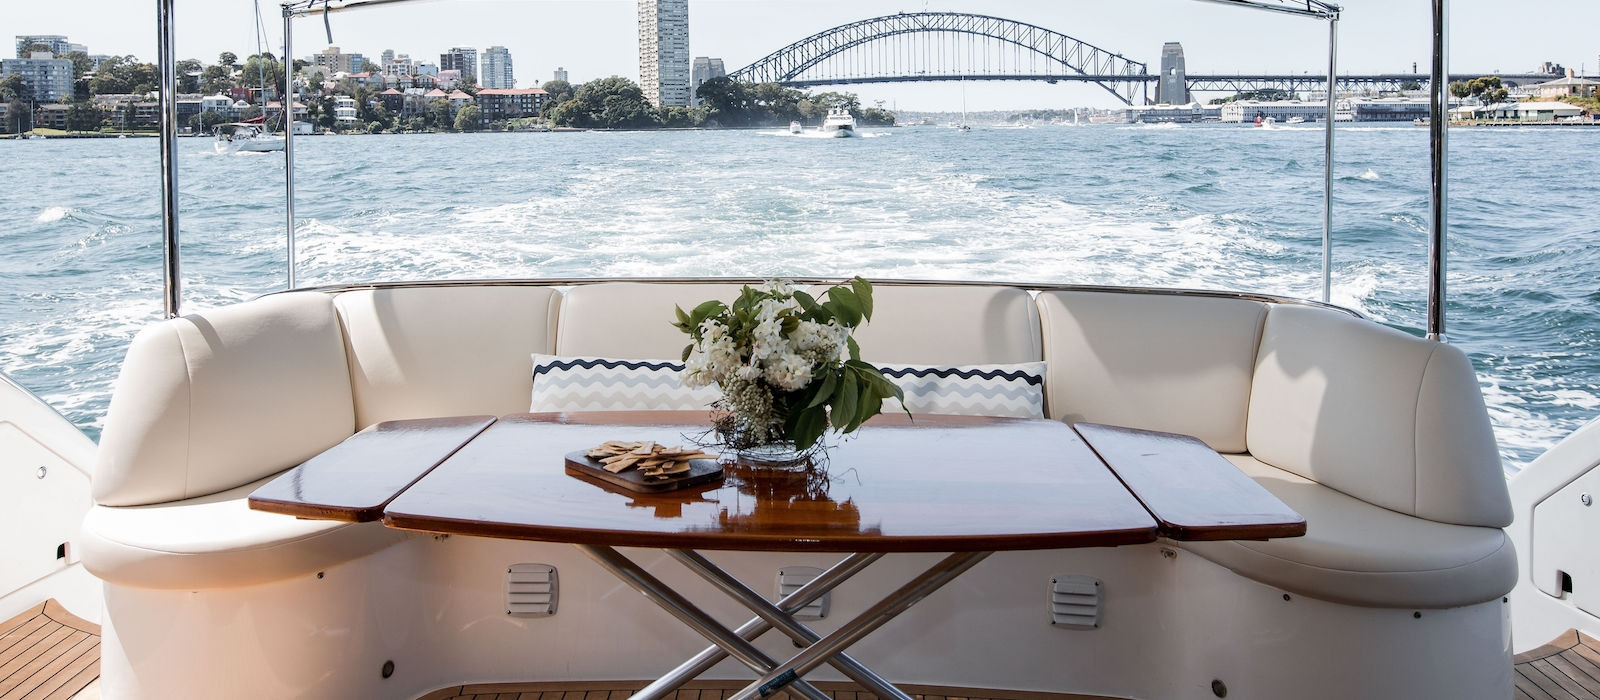 Aft deck on Enigma luxury boat hire